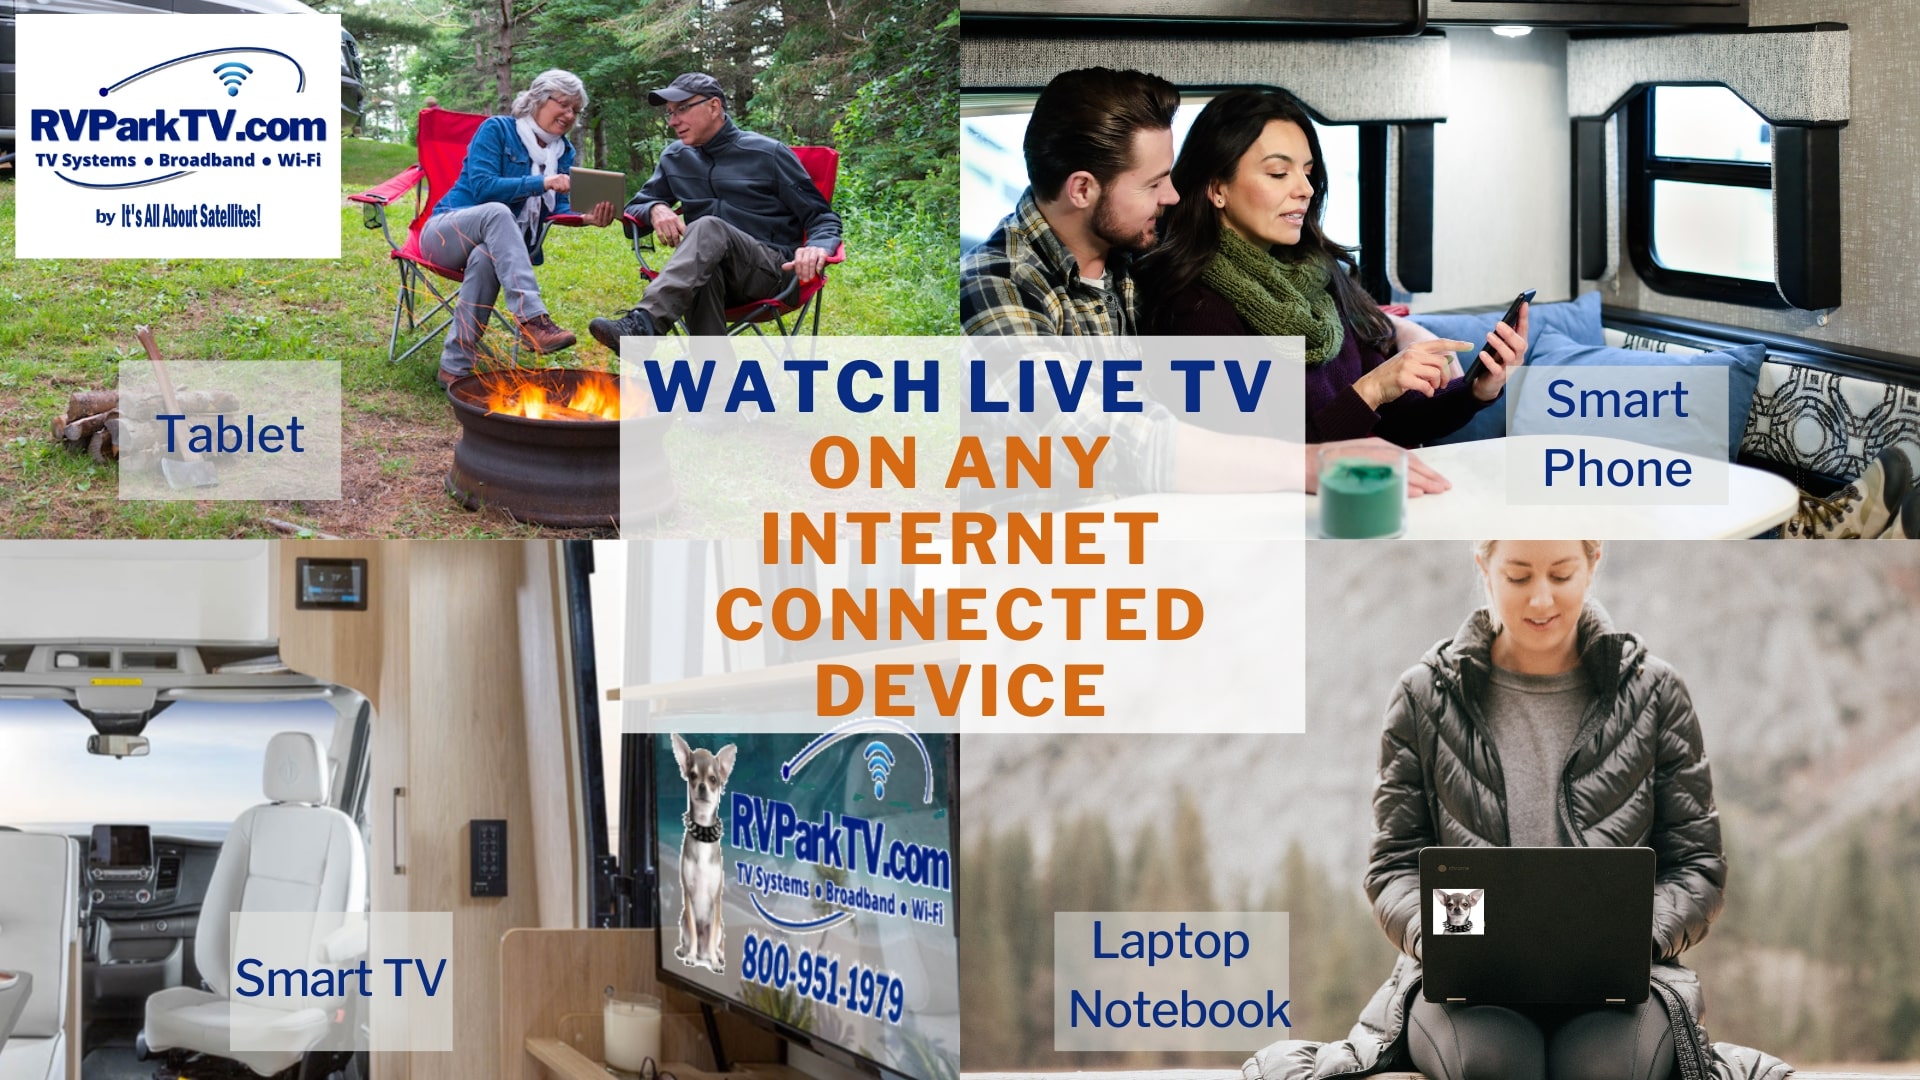 RVParkTV.com - TV Systems and Programming, WiFi Networks, and Blazing Fast Broadband Internet that Lets Your Campers Watch TV on Any Internet Connected Device